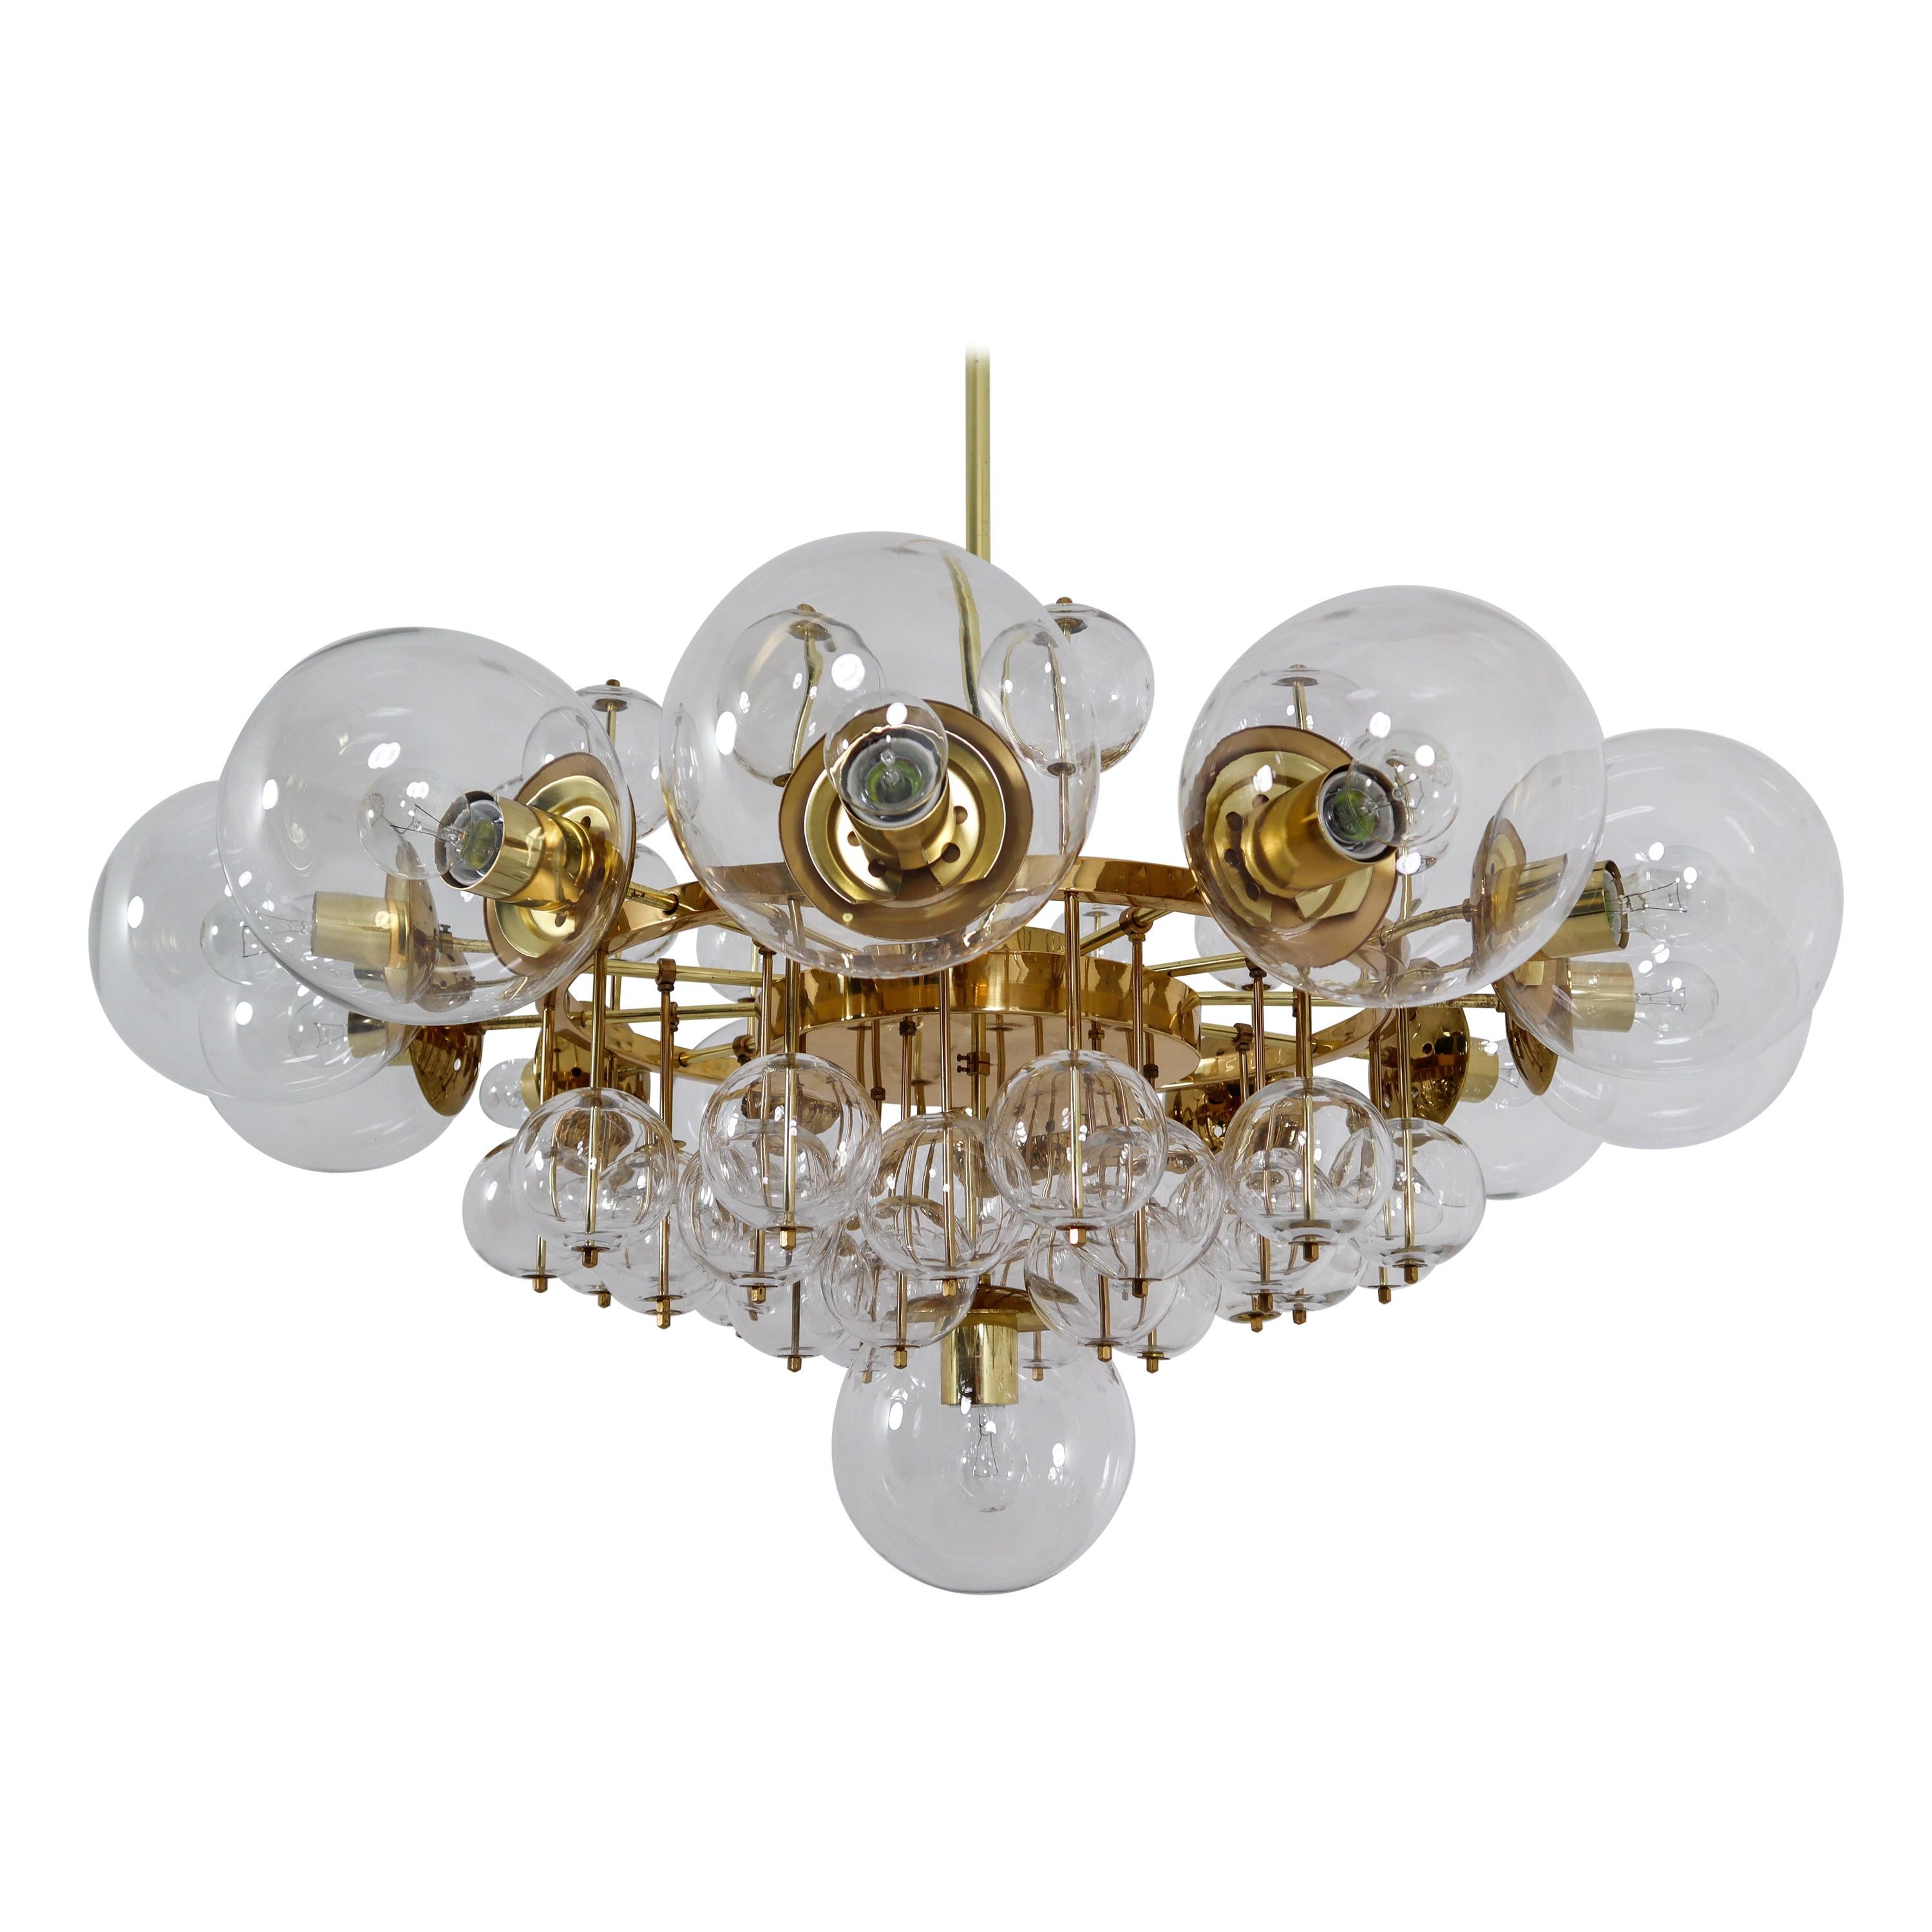 Midcentury Hotel Chandelier with Brass Fixture and Hand-Blowed Glass Globes